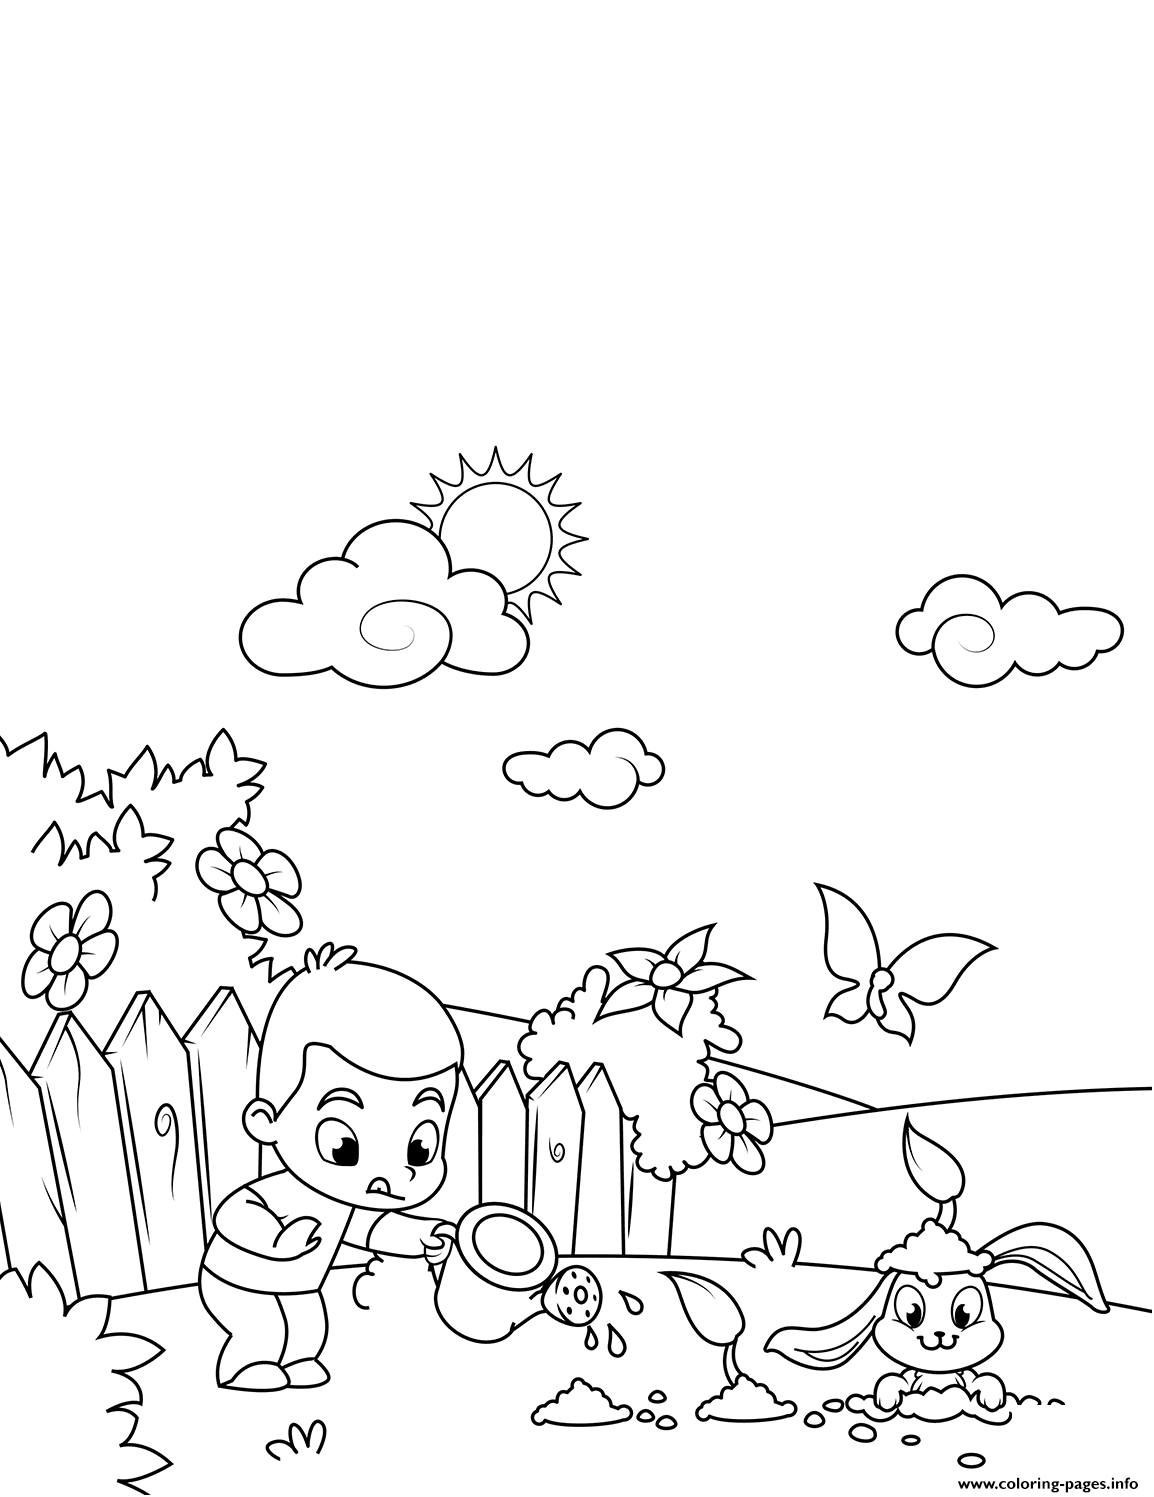 Boy Watering Flowers And Cute Rabbit Digging Through Them coloring